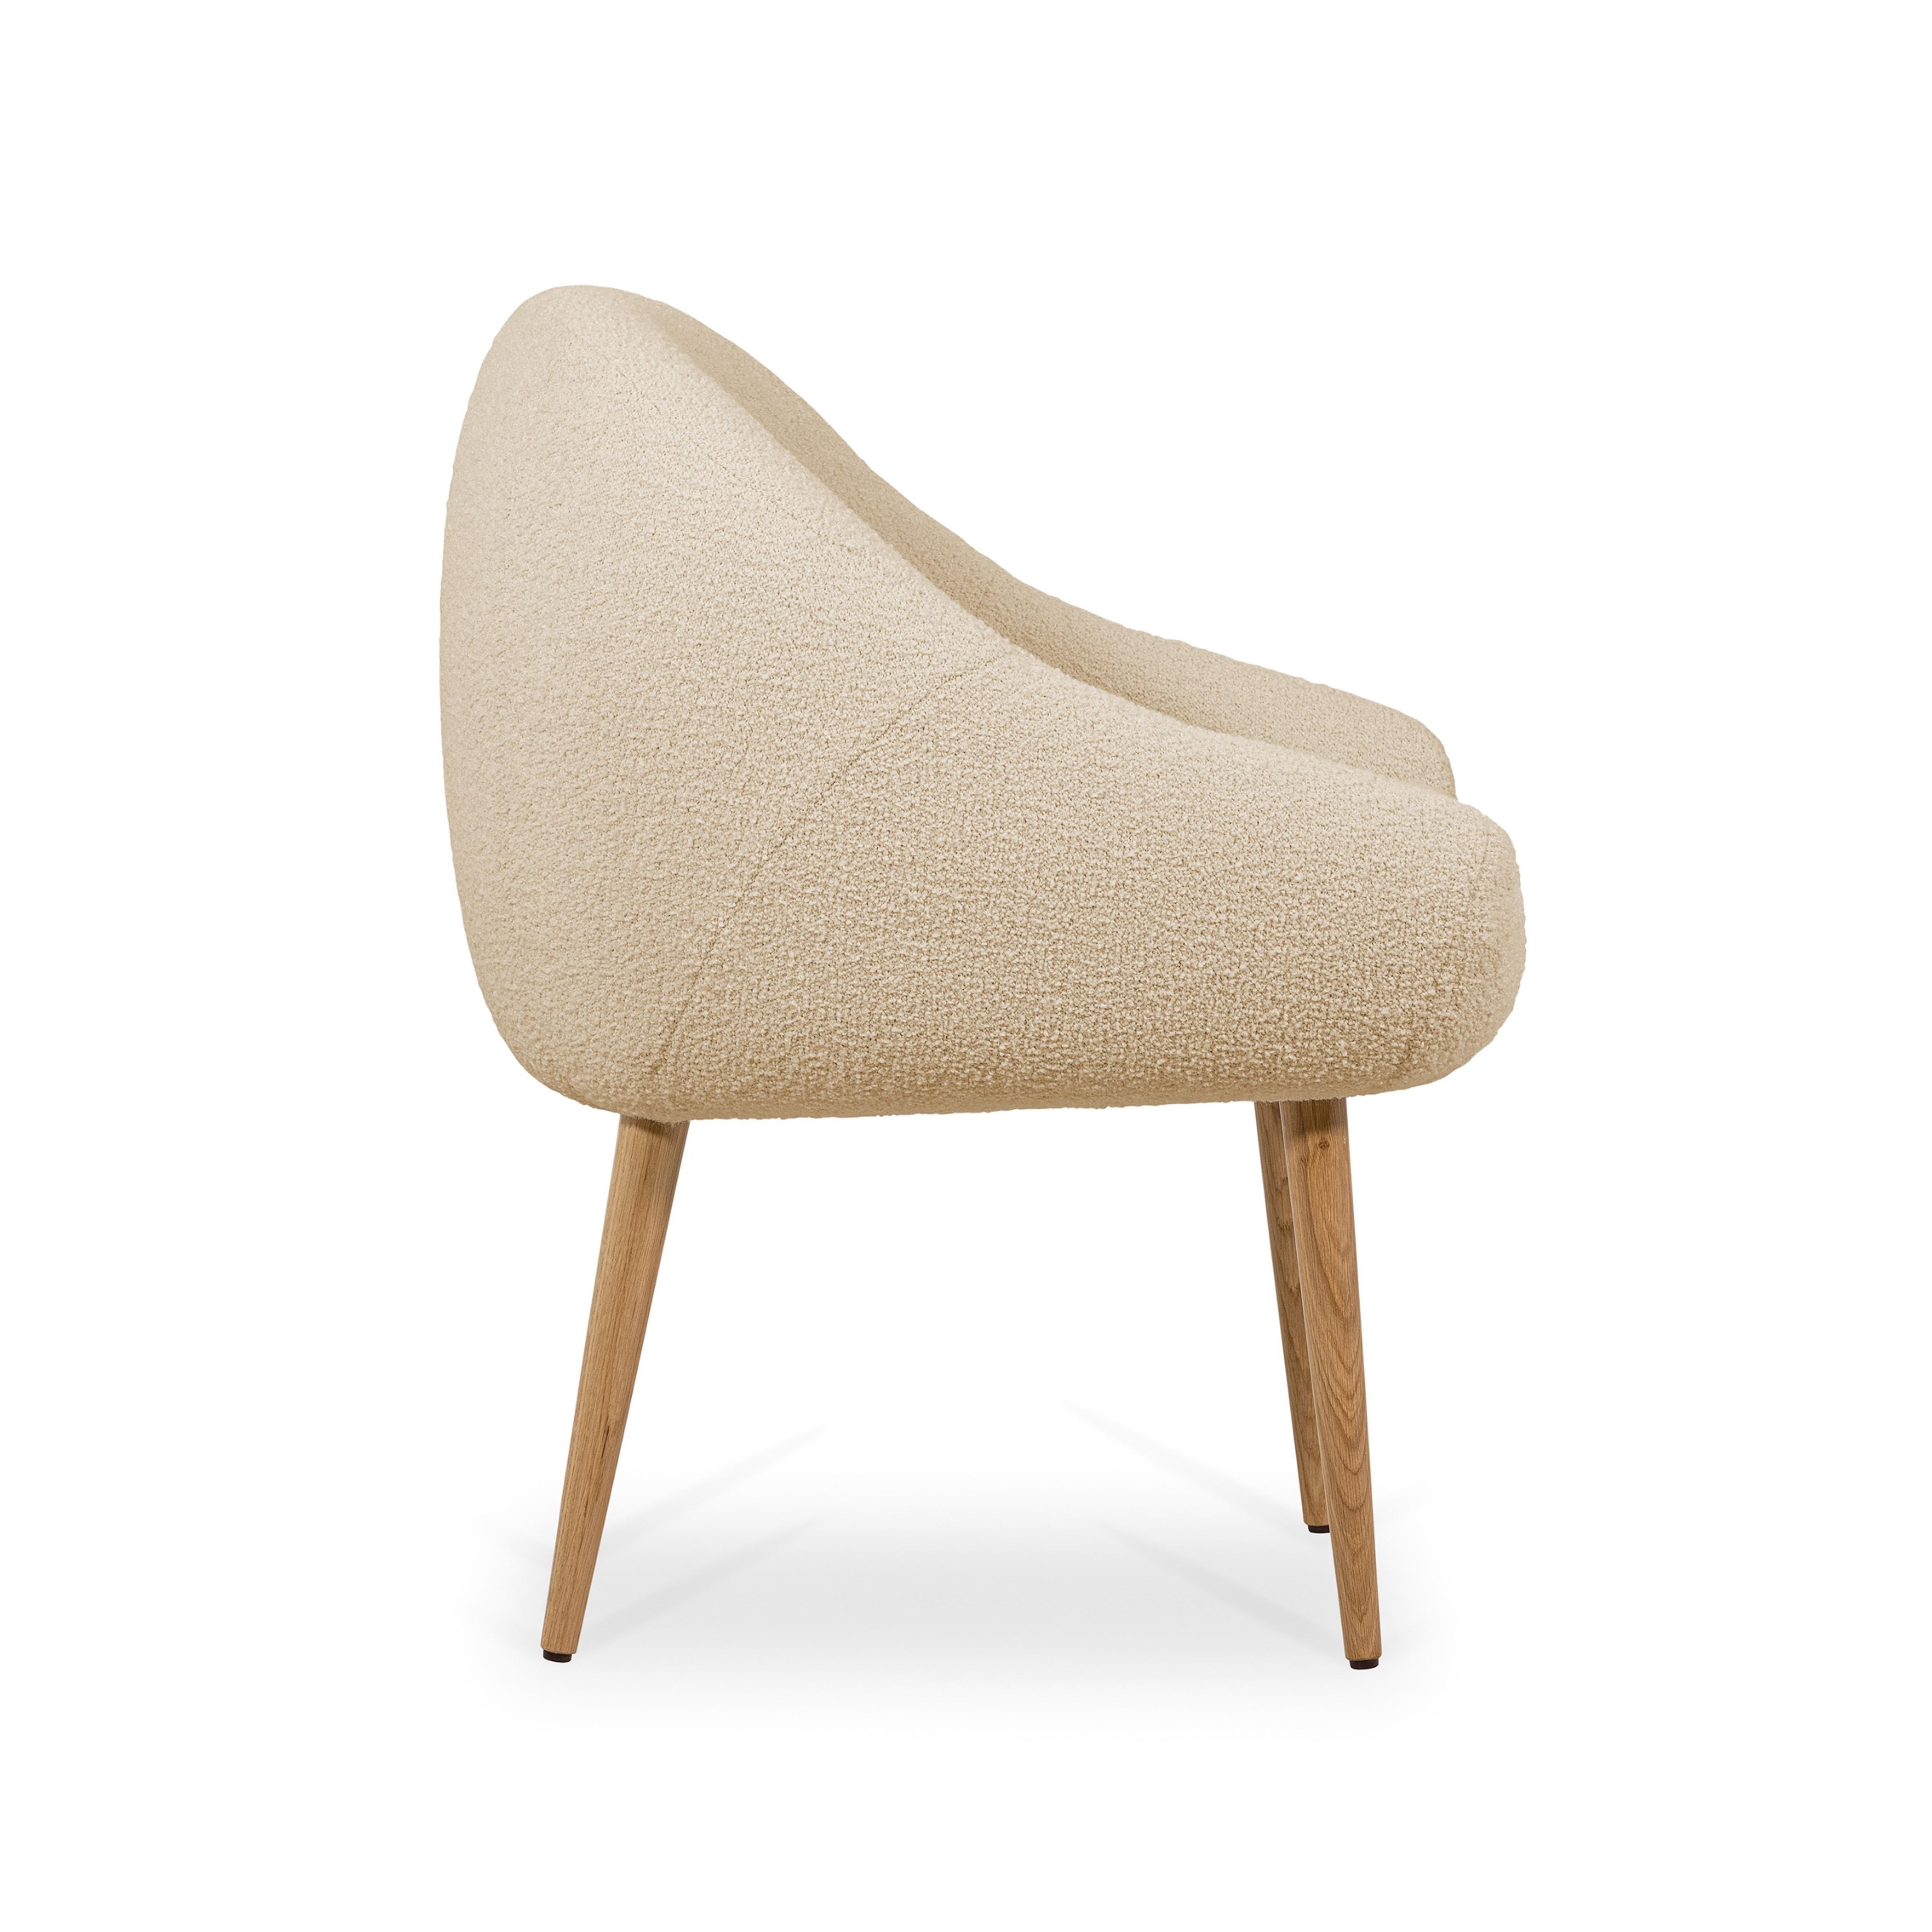 Portuguese Niemeyer Dining Chair, Bouclé and Oak, Insidherland by Joana Santos Barbosa For Sale